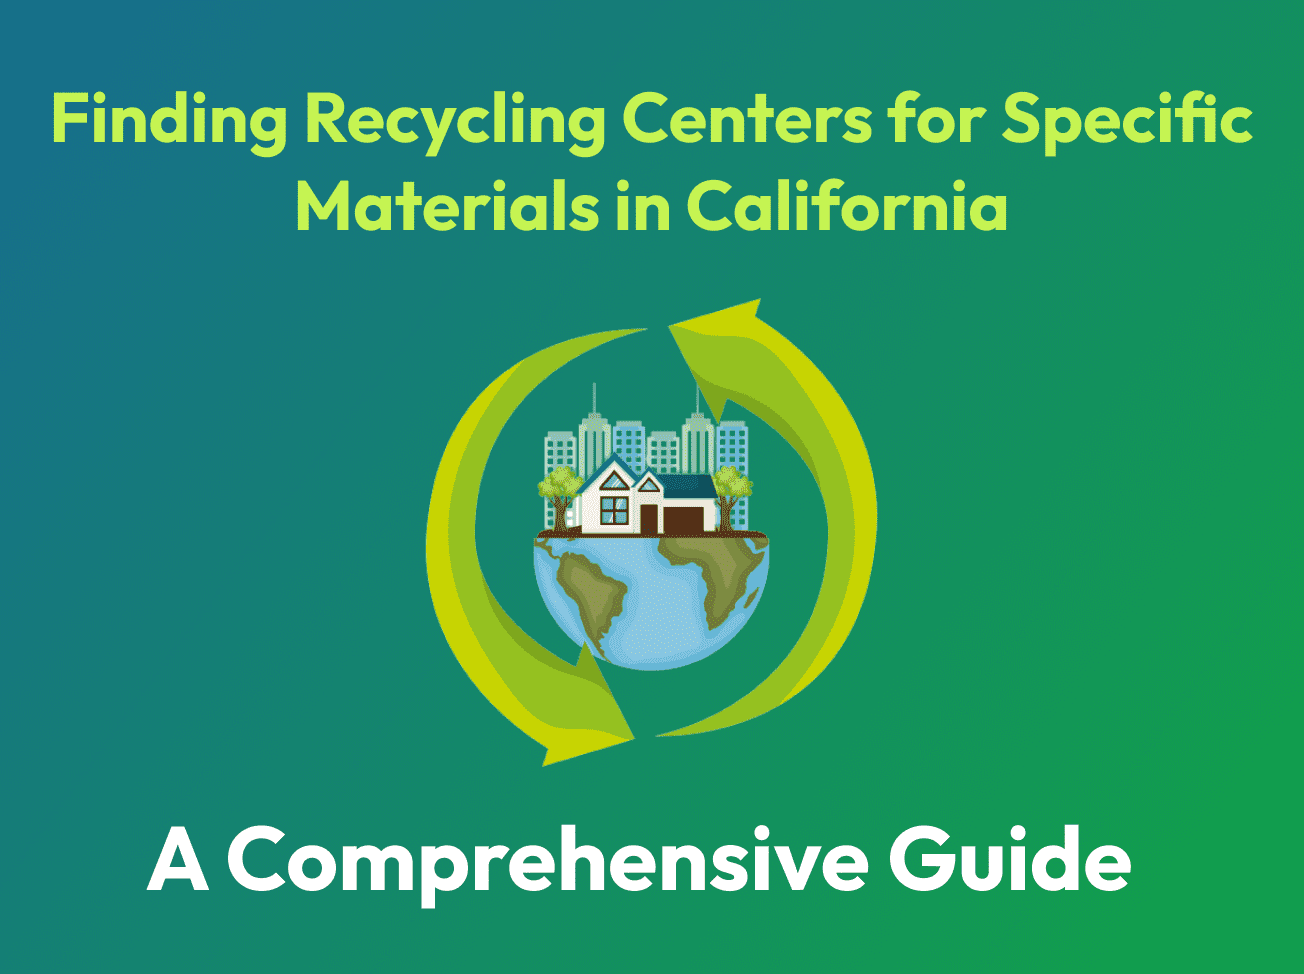 Guide for finding recycling centers in California.